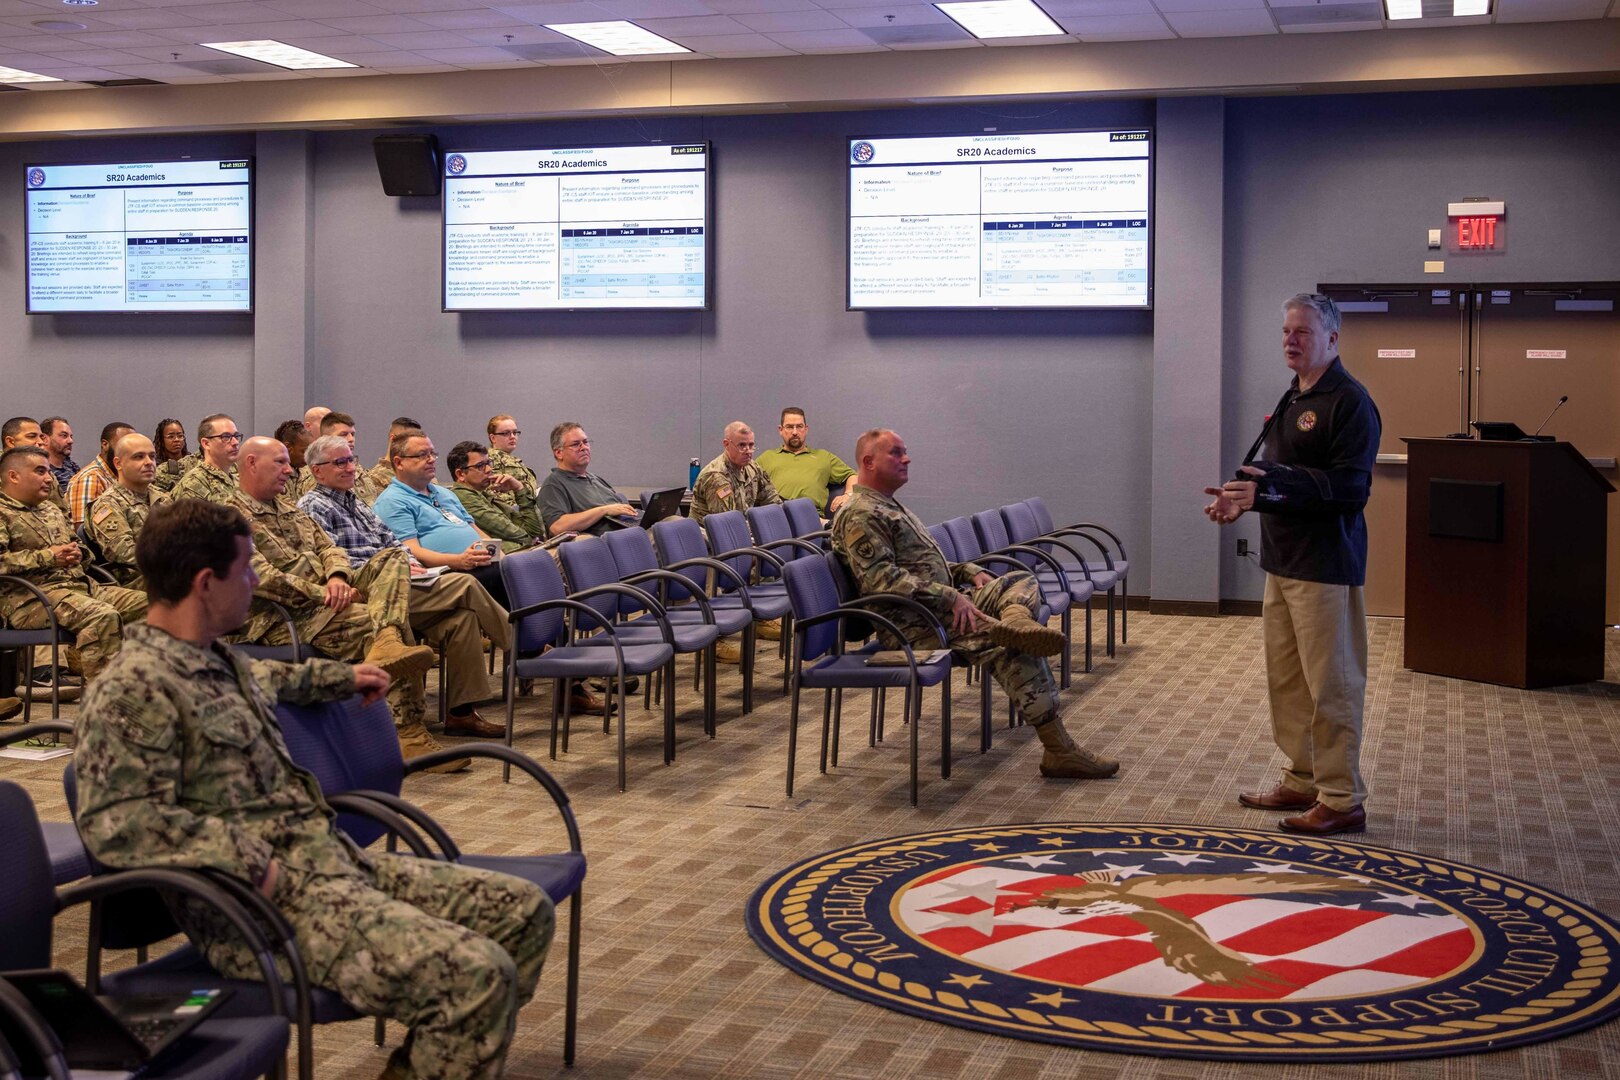 Joint Task Force Civil Support (JTF-CS) Deputy to the Commander Casey Collins provides opening remarks during the command’s Exercise Sudden Response 2020 (SR20) staff academics conference, held at the command’s headquarters, Jan. 6-8. During the event, JTF-CS and Defense Chemical, Biological, Radiological and Nuclear Response Force personnel focused on major movements and friction points that would be encountered during the deployment and operation phases of SR20. (Official DoD photo by Mass Communication Specialist 3rd Class Michael Redd/RELEASED)